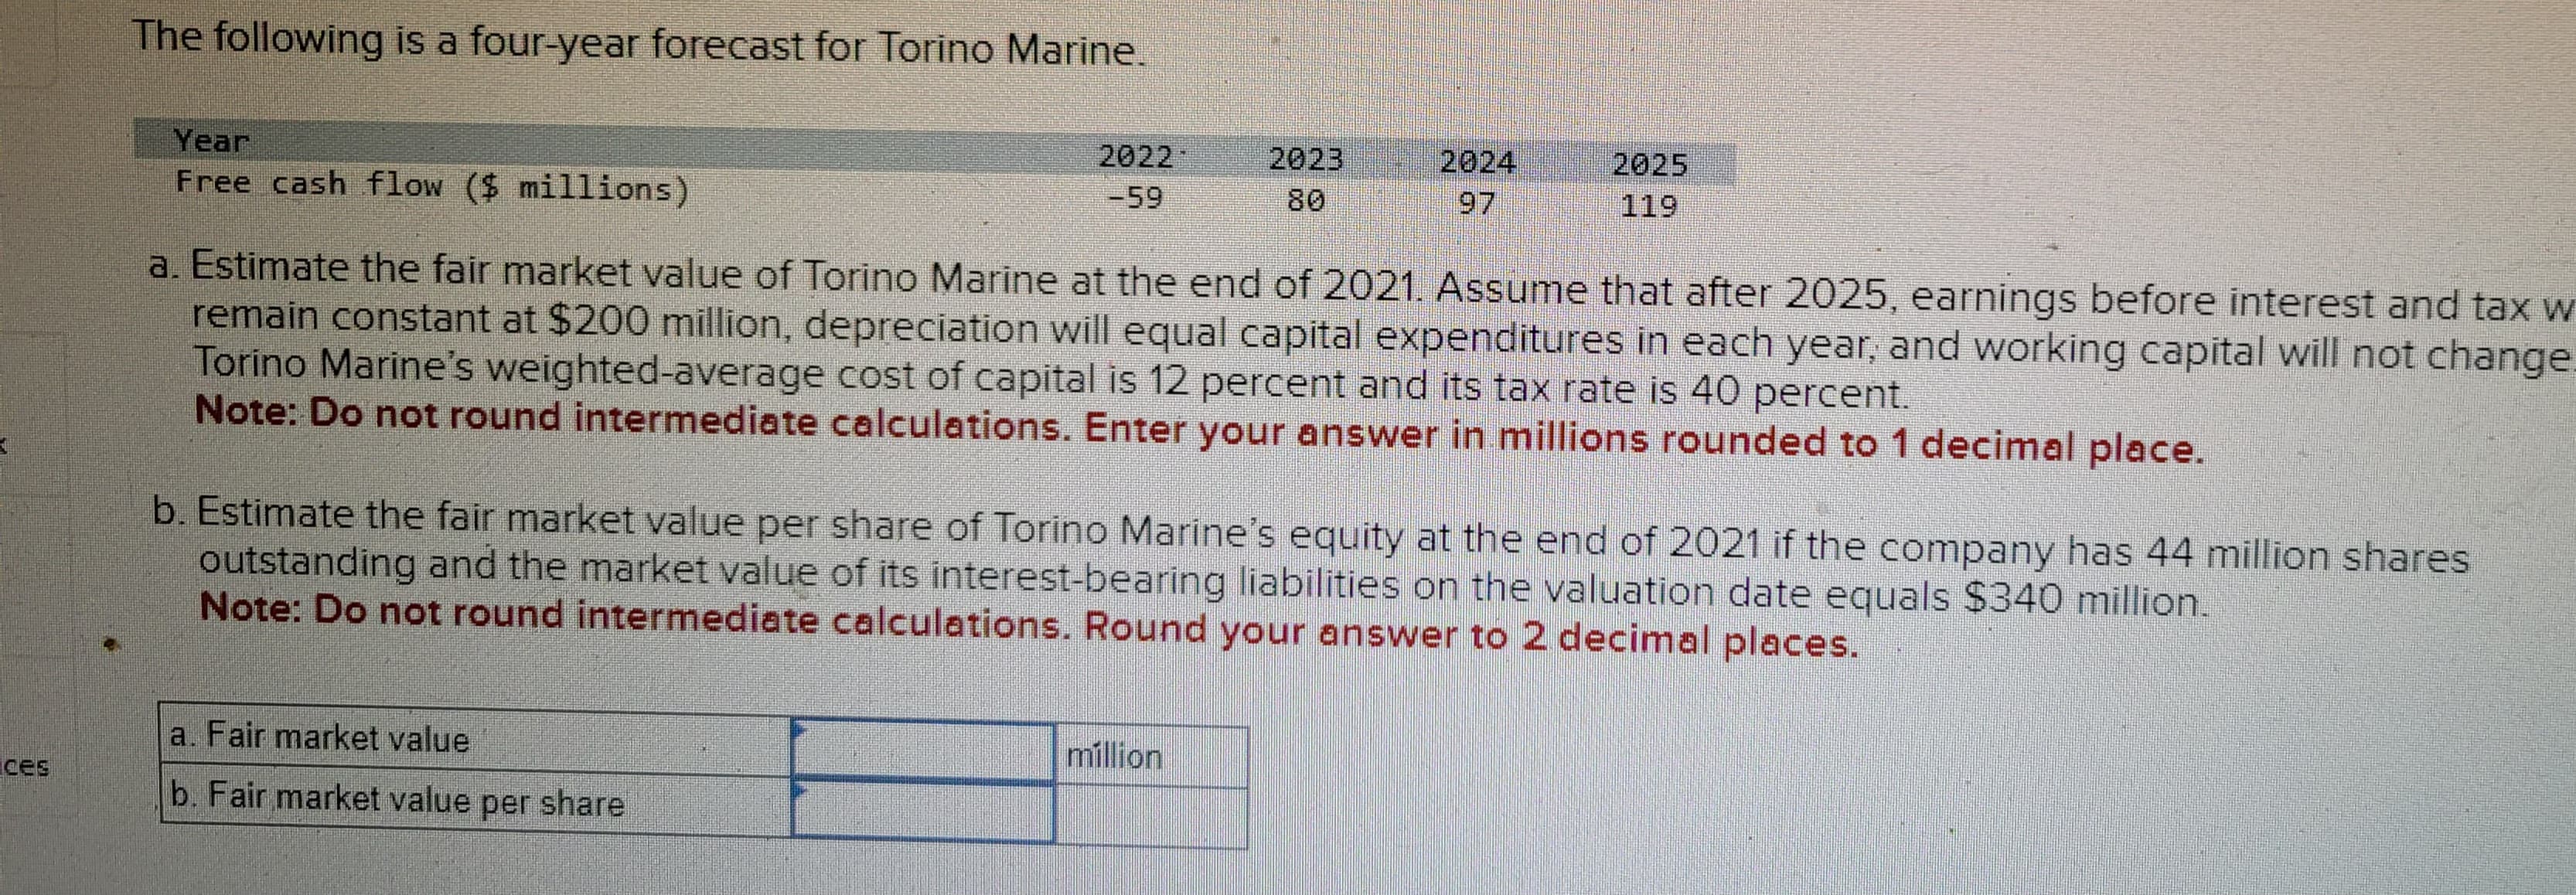 3
des
The following is a four-year forecast for Torino Marine.
Year
Free cash flow ($ millions)
2022
-59
a. Fair market value
b. Fair market value per share
80
a. Estimate the fair market value of Torino Marine at the end of 2021. Assume that after 2025, earnings before interest and tax w
remain constant at $200 million, depreciation will equal capital expenditures in each year, and working capital will not change.
Torino Marine's weighted-average cost of capital is 12 percent and its tax rate is 40 percent.
Note: Do not round intermediate calculations. Enter your answer in millions rounded to 1 decimal place.
2025
b. Estimate the fair market value per share of Torino Marine's equity at the end of 2021 if the company has 44 million shares
outstanding and the market value of its interest-bearing liabilities on the valuation date equals $340 million.
Note: Do not round intermediate calculations. Round your answer to 2 decimal places.
million